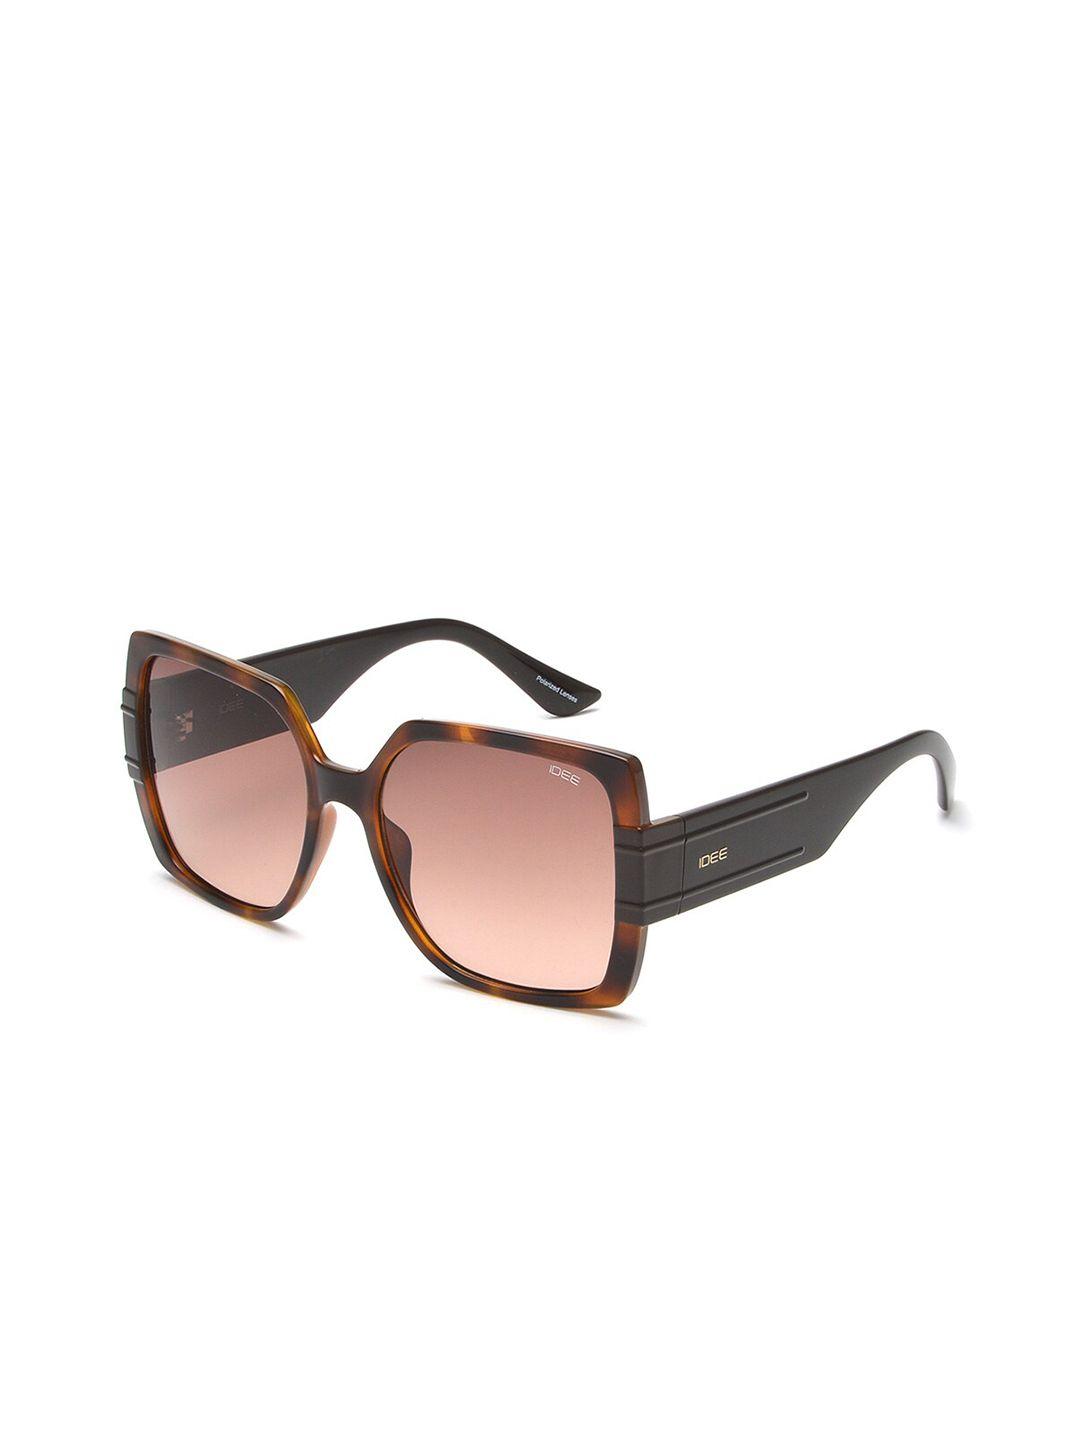 idee women oversized sunglasses with uv protected lens